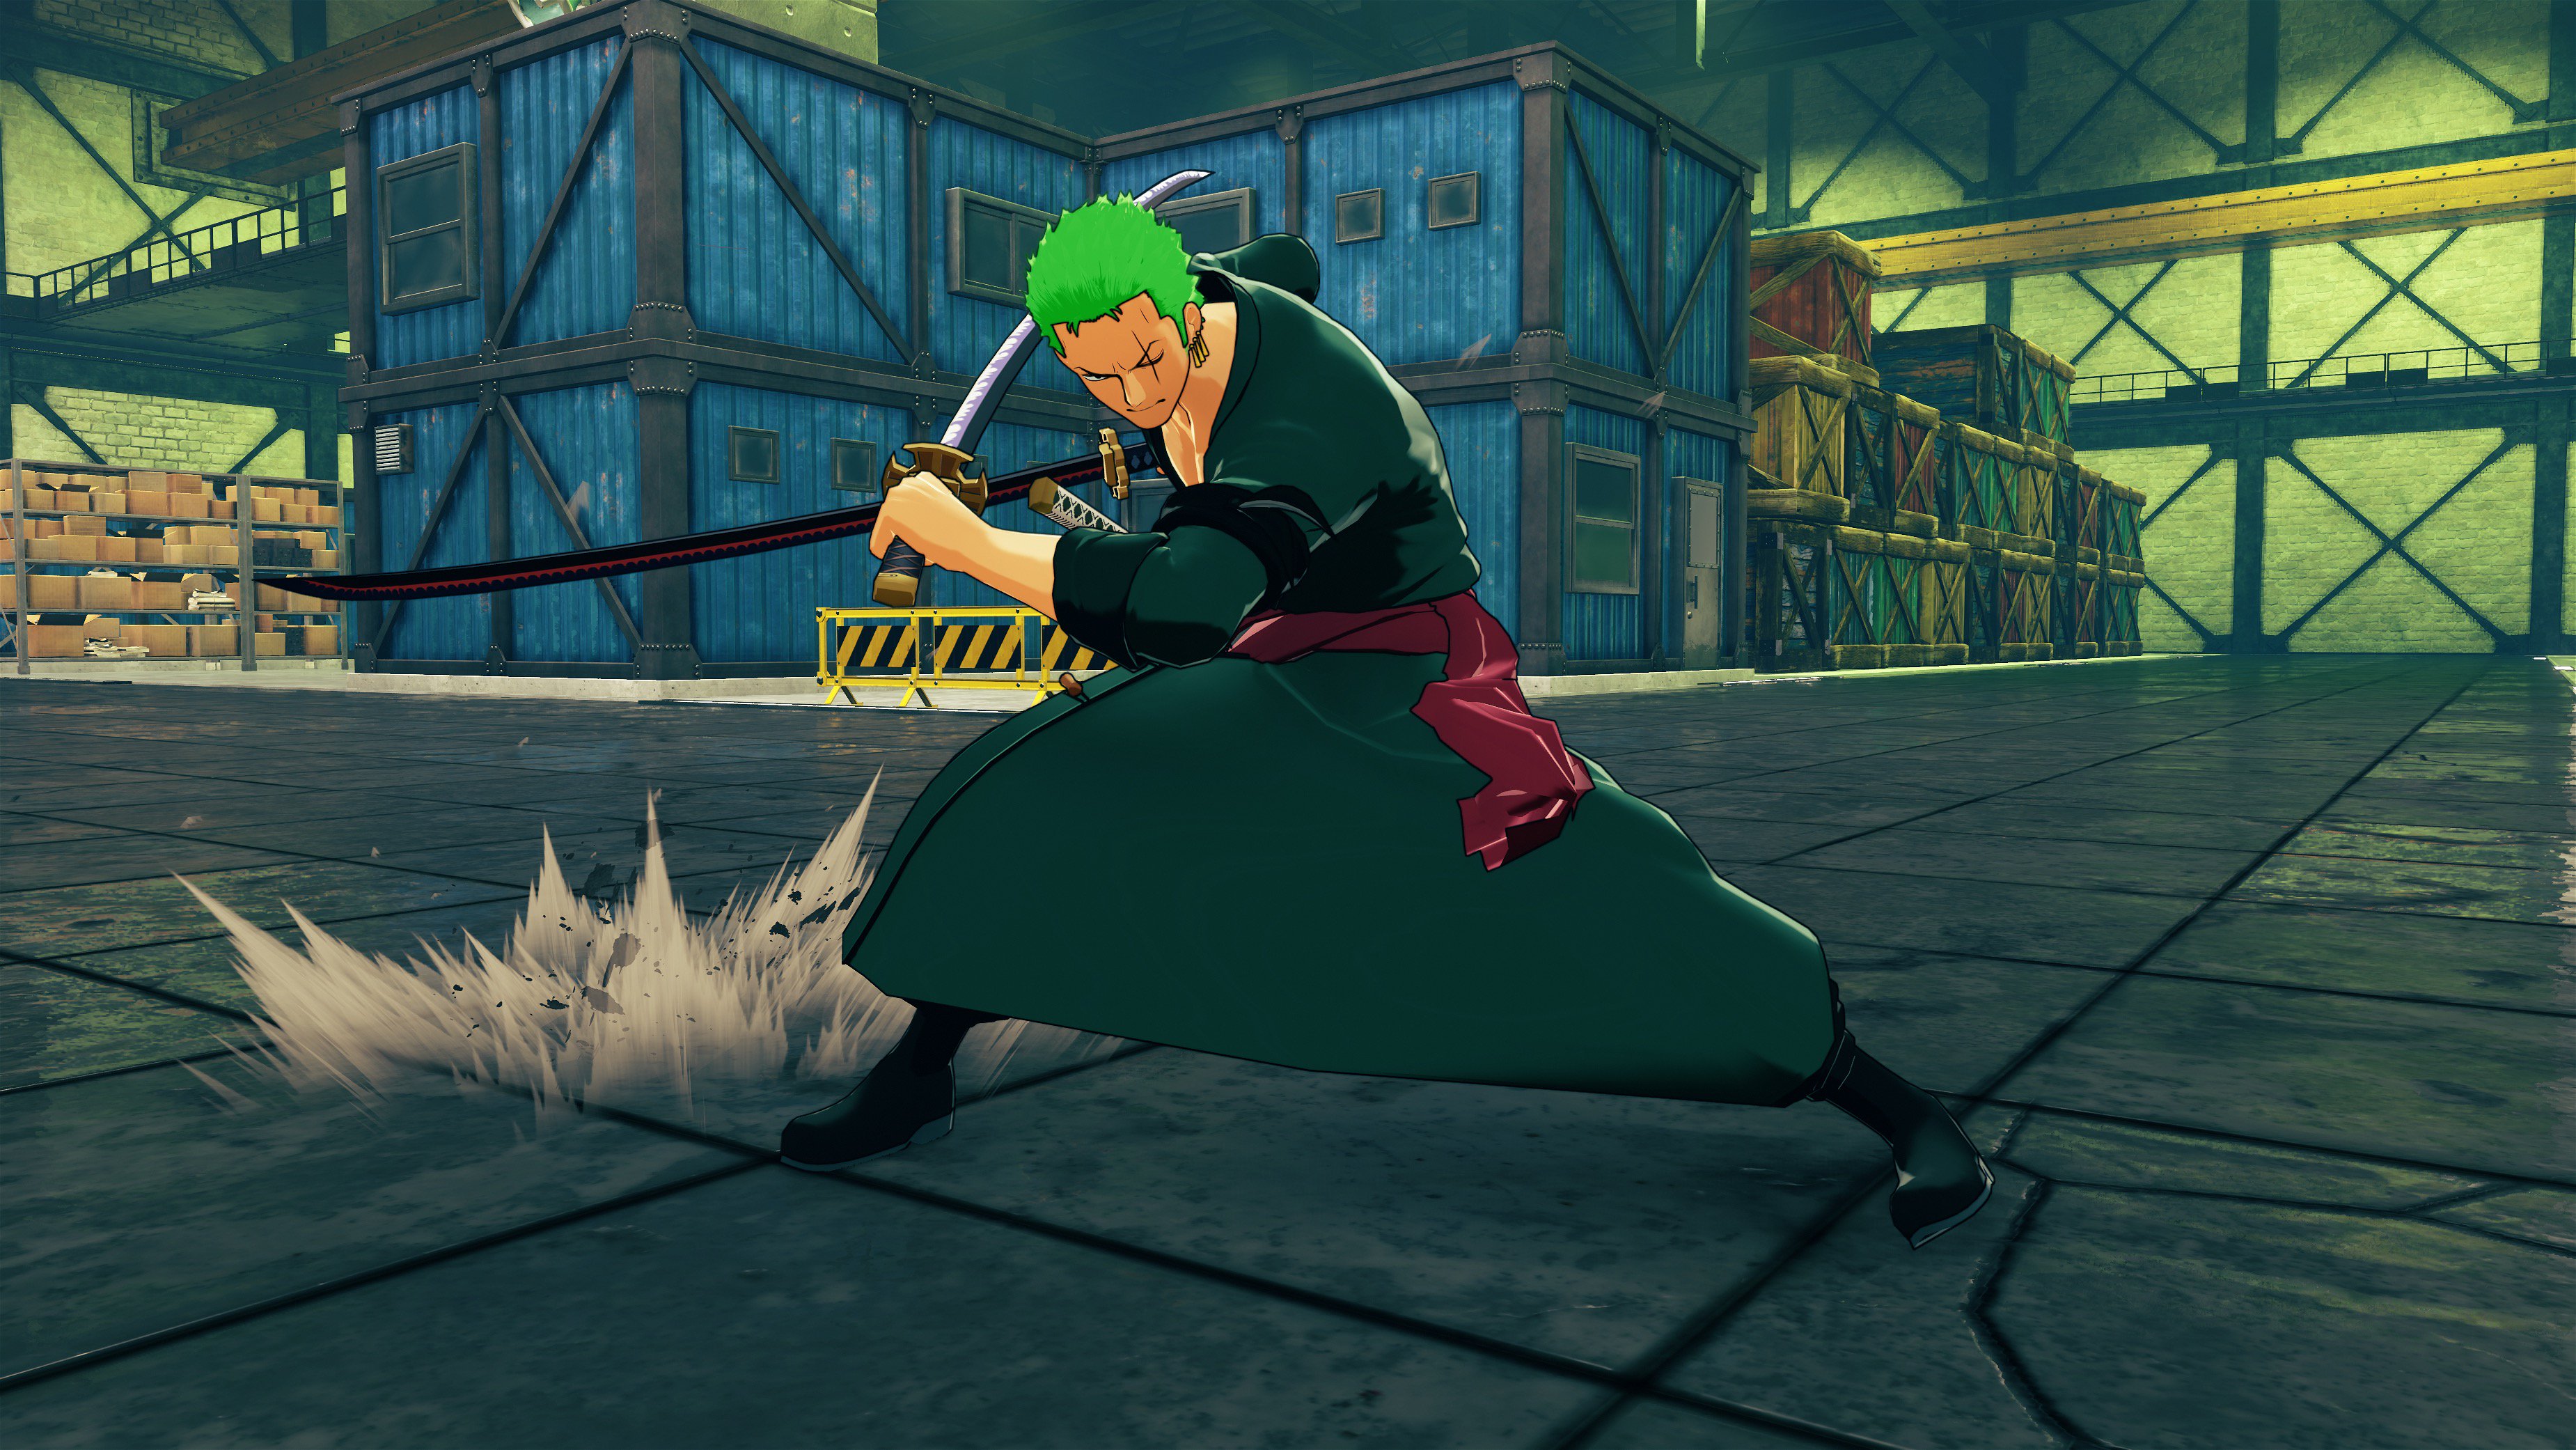 Play as Zoro in the new ONE PIECE WORLD SEEKER DLC coming on 12th